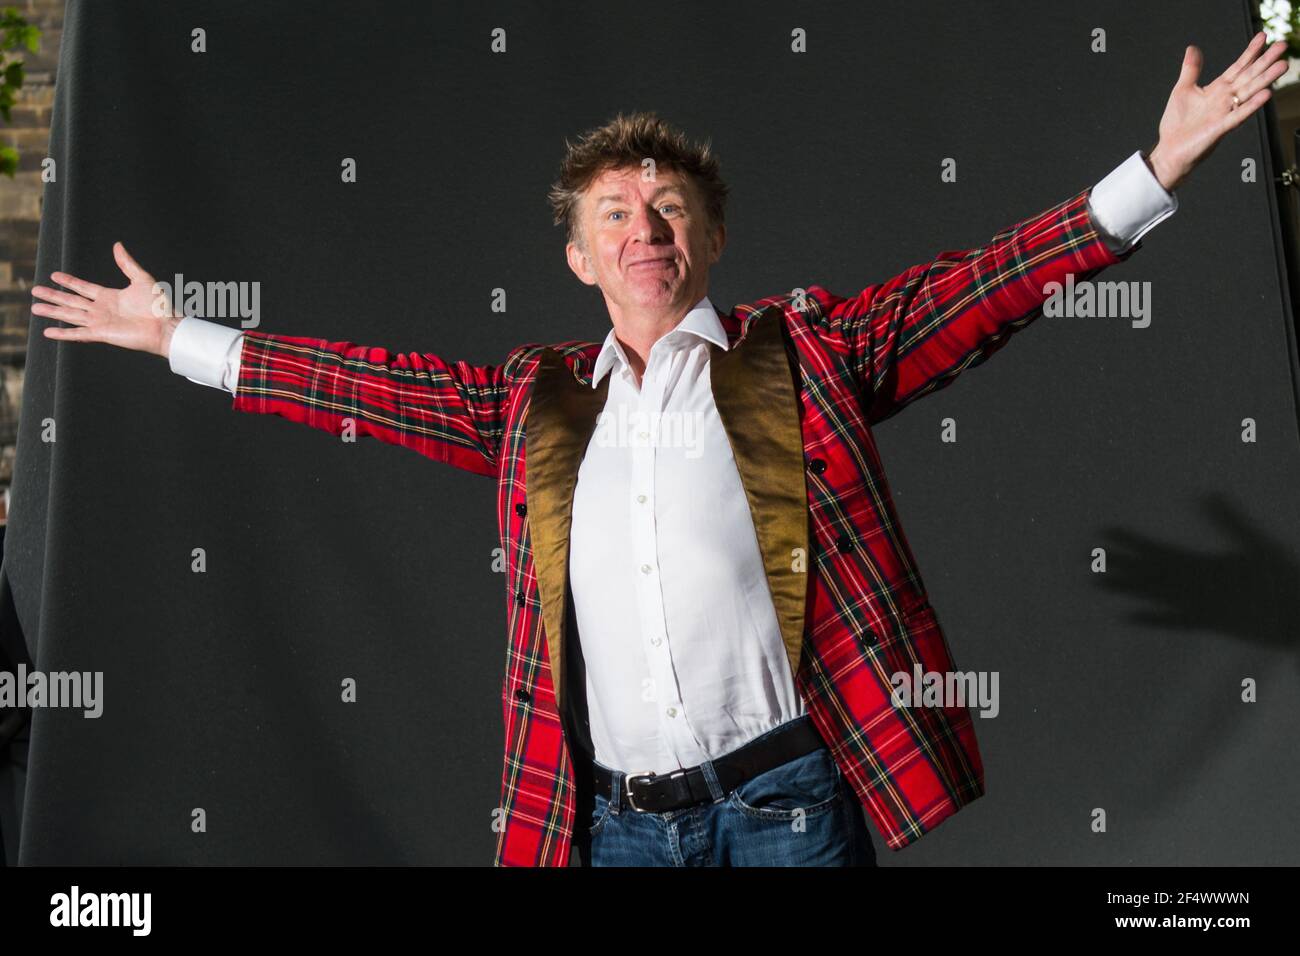 Edimburgh, Scotland. 19 August, 2018. Scottish poet and stand-up comedian Elvis Mcgonagal attends a photocall during the Edinburgh International Book Stock Photo